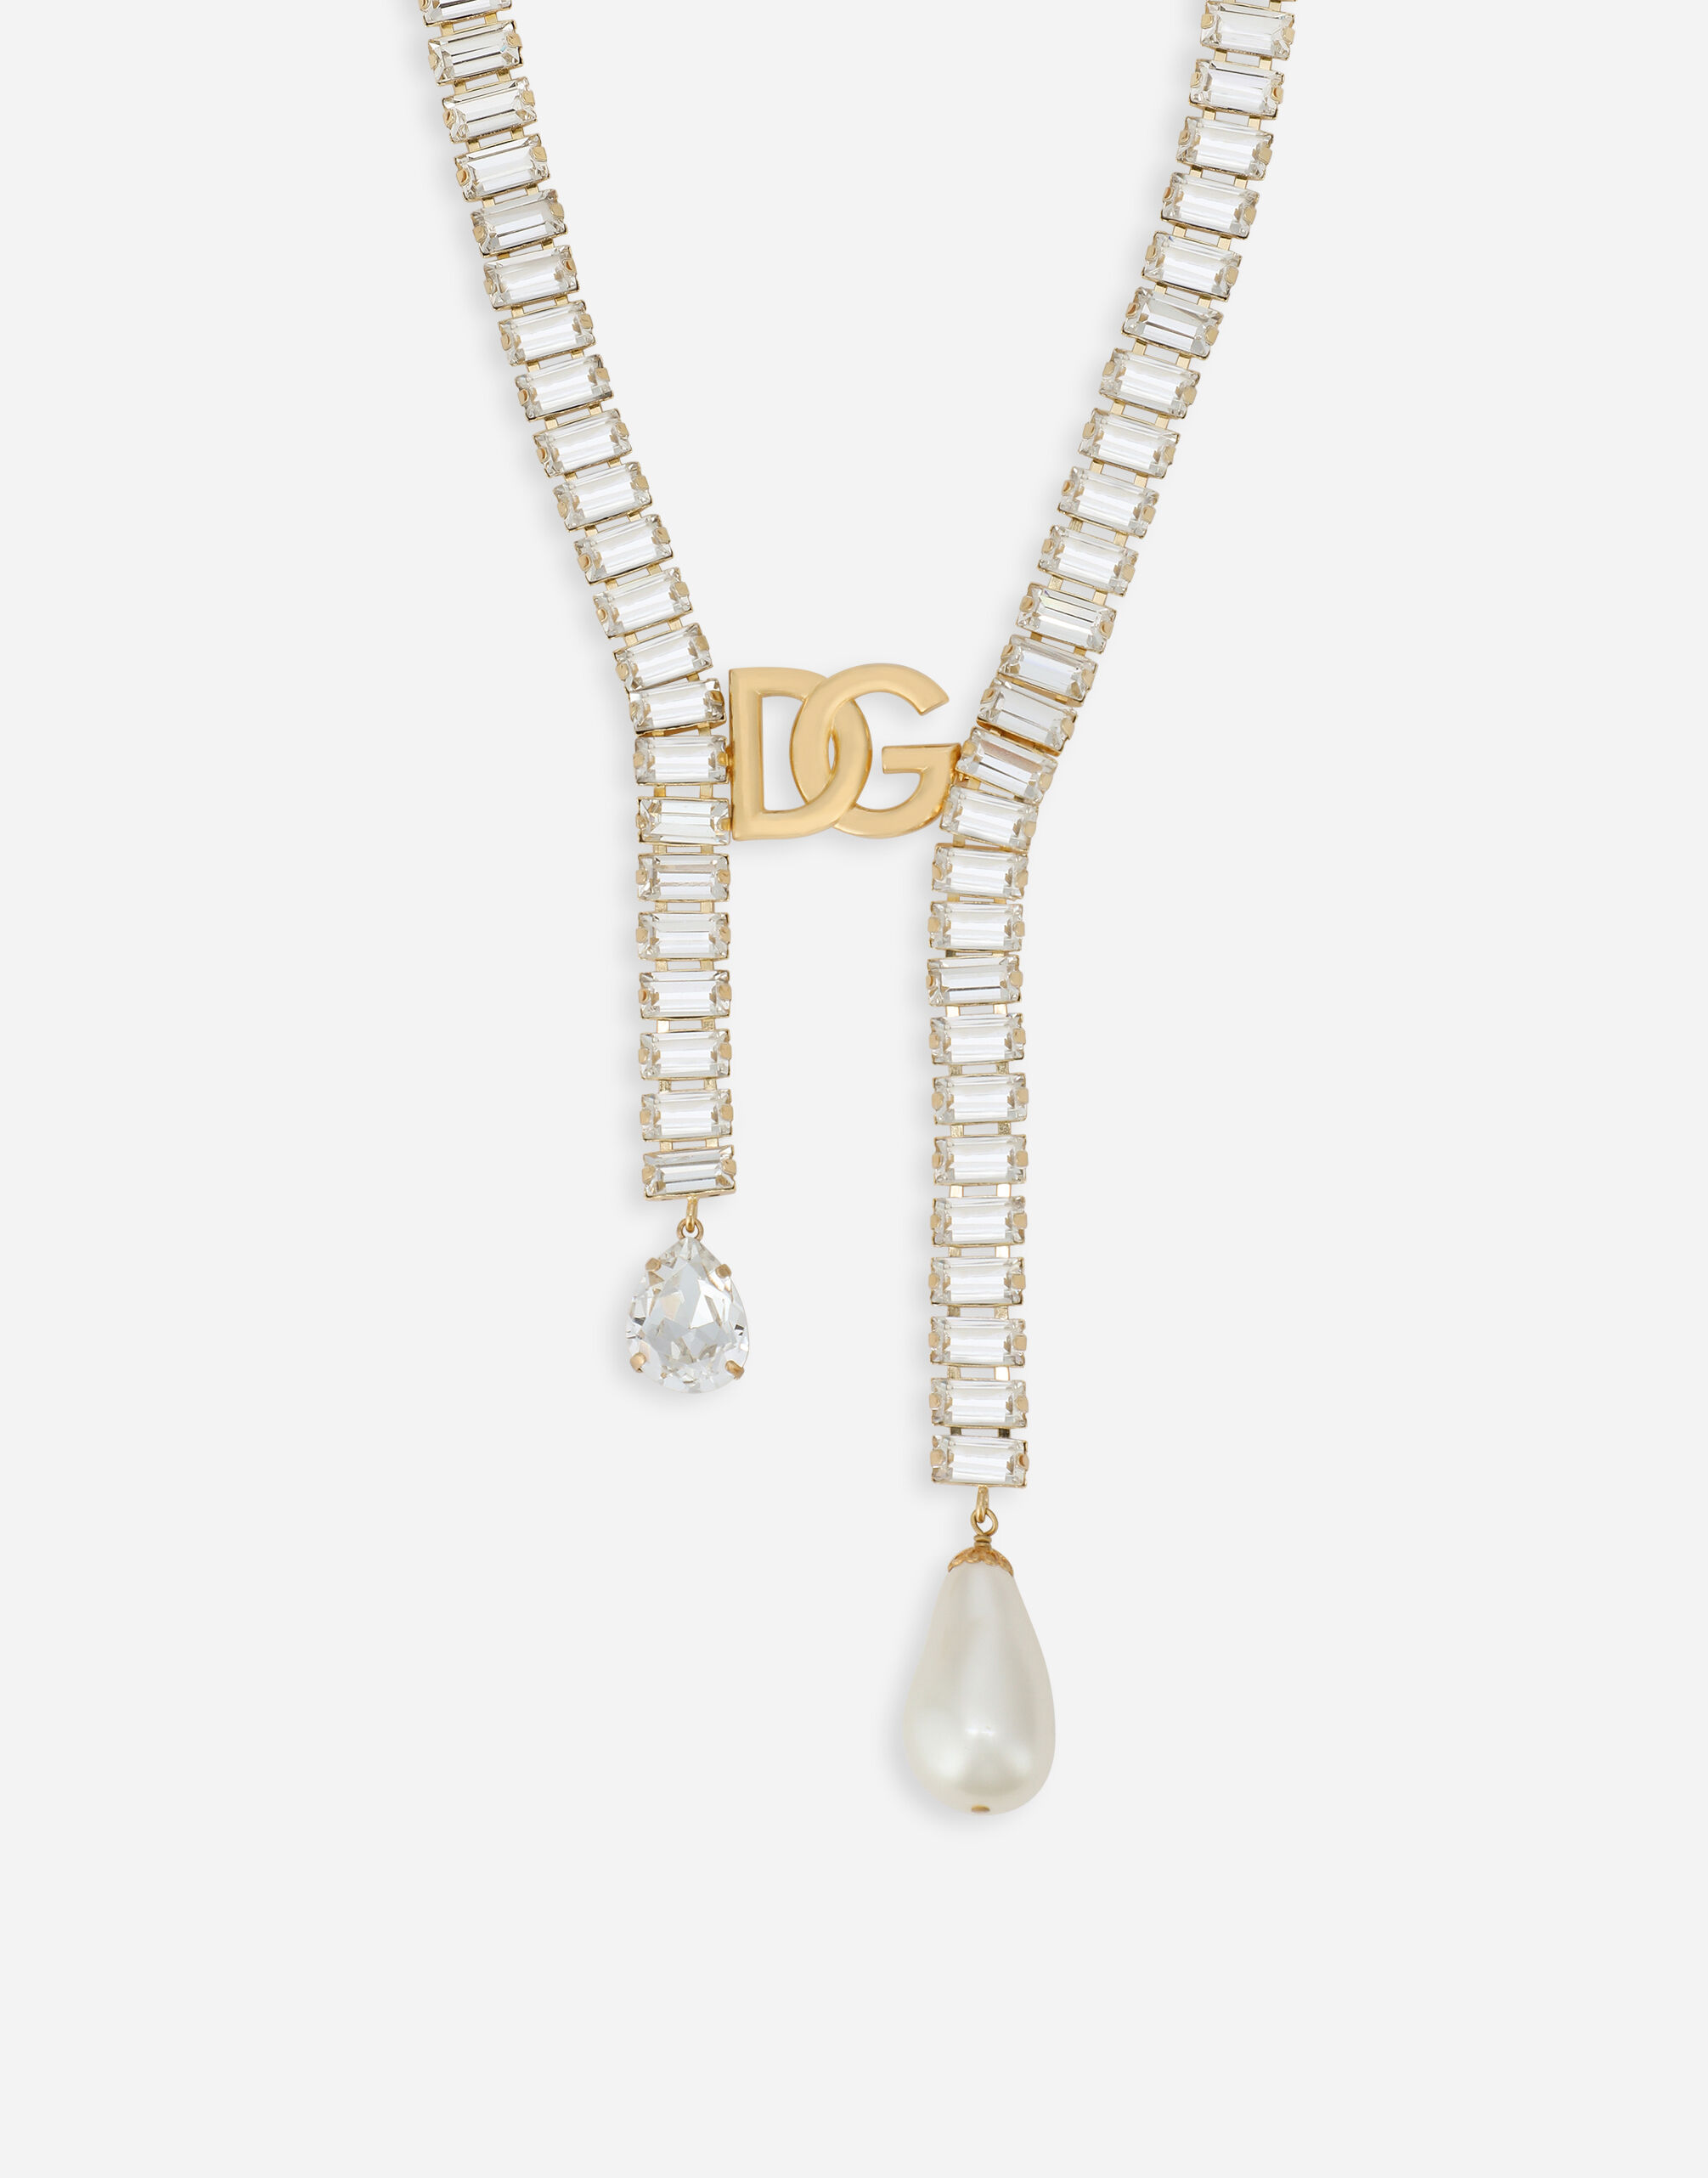 Necklace with pearls, rhinestones and DG logo in Gold for 